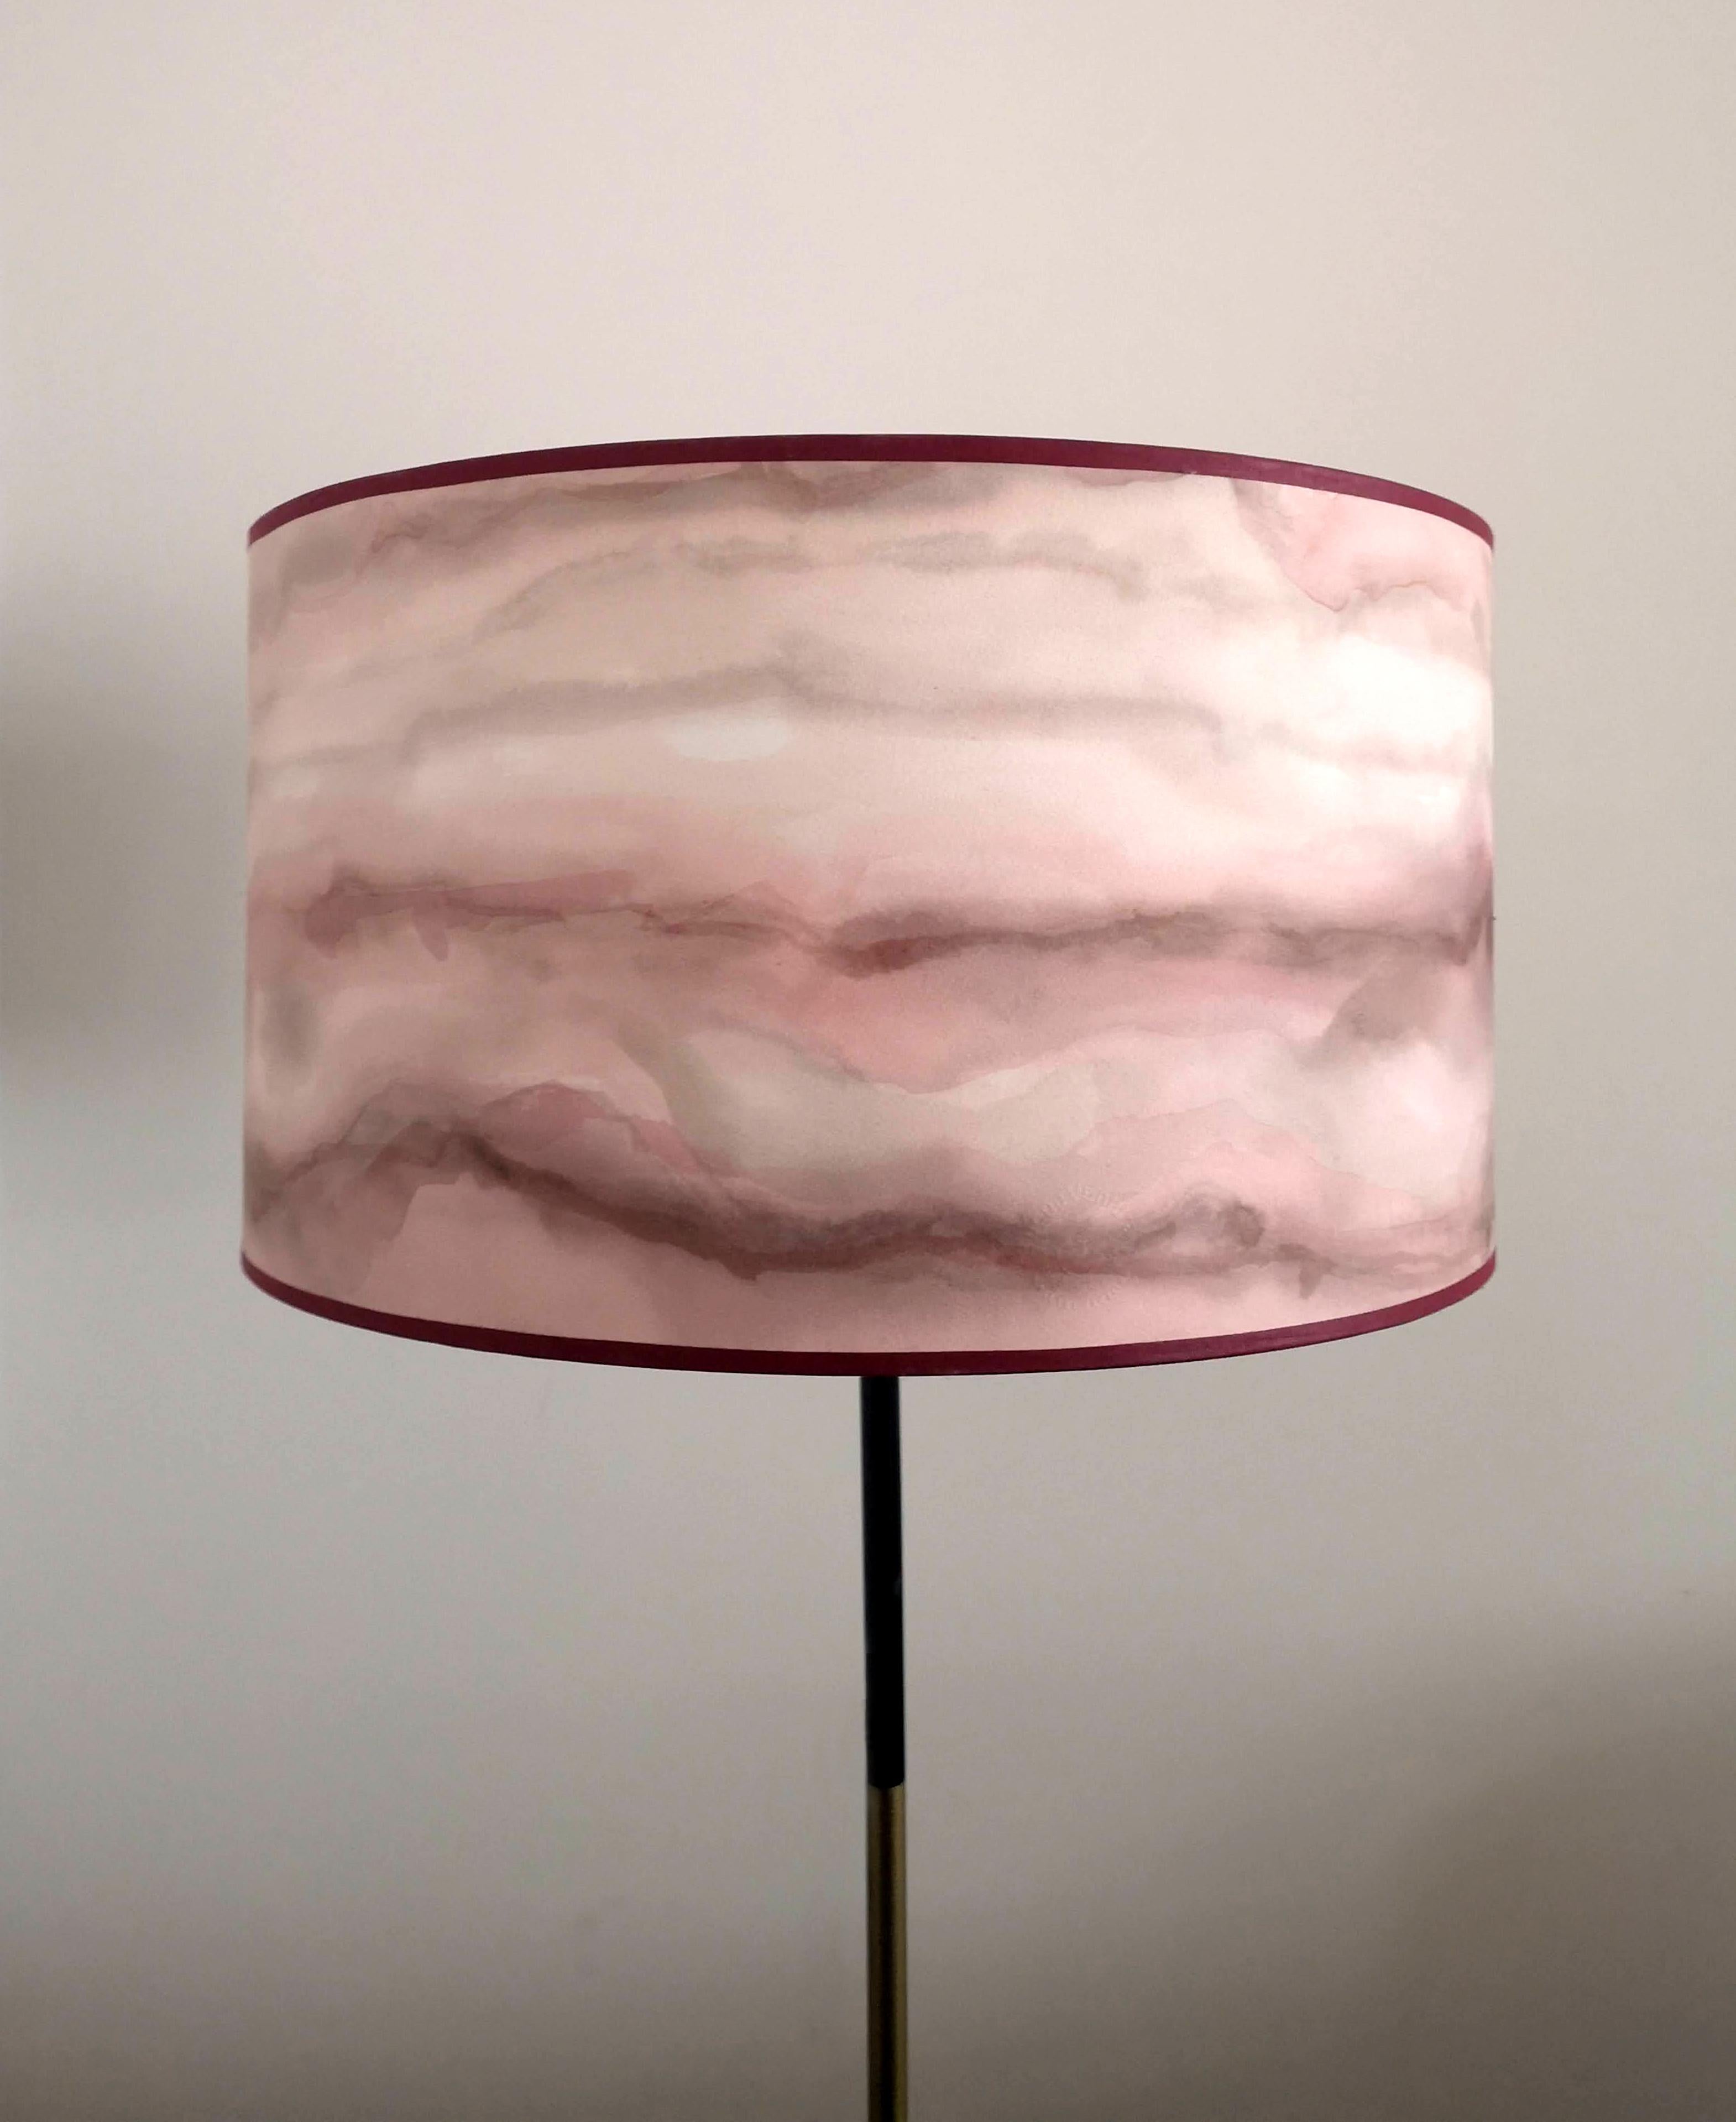 Welcome to our Lampshade Company
In BuenaVentura we produce hand-painted wallpaper. We combine sophisticated processes of handcrafted creation in order to capture the fleeting effects of nature,elegantly and luminously.
Our paintings are our own